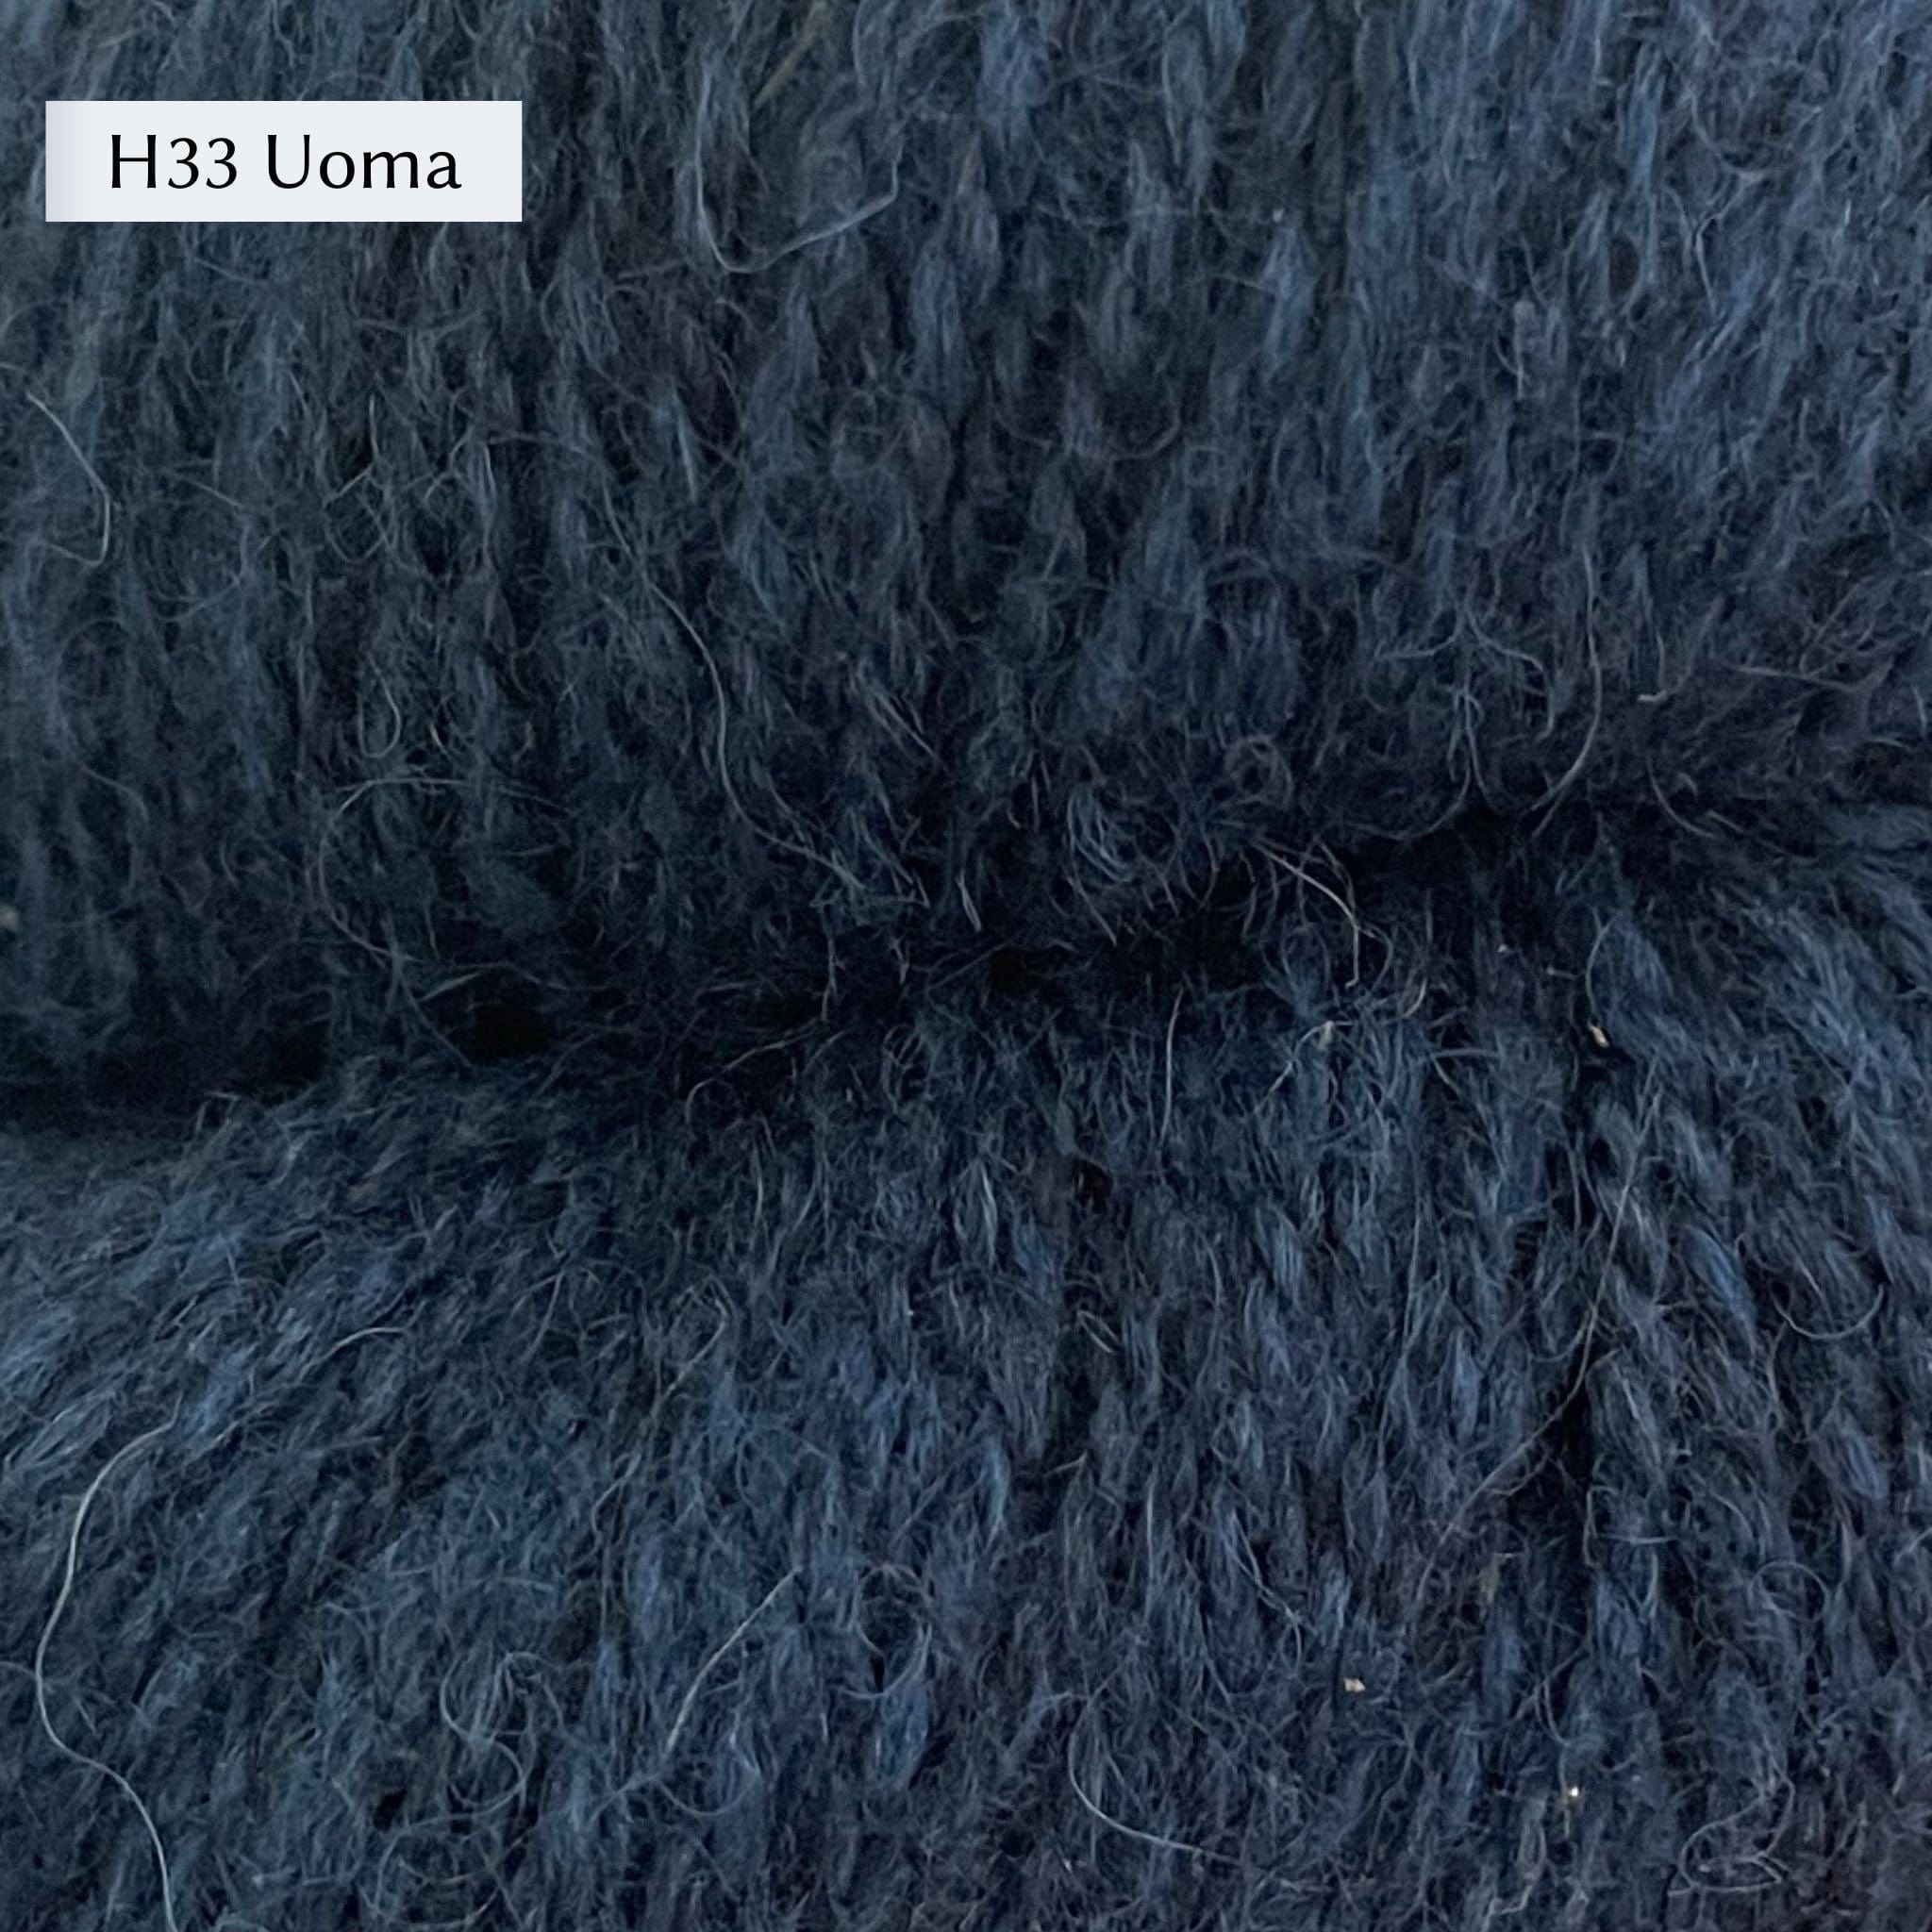 Tukuwool DK Yarn, 100% Finnish Wool shown in colorway H33 Uoma which is a heathered medium blue color. 